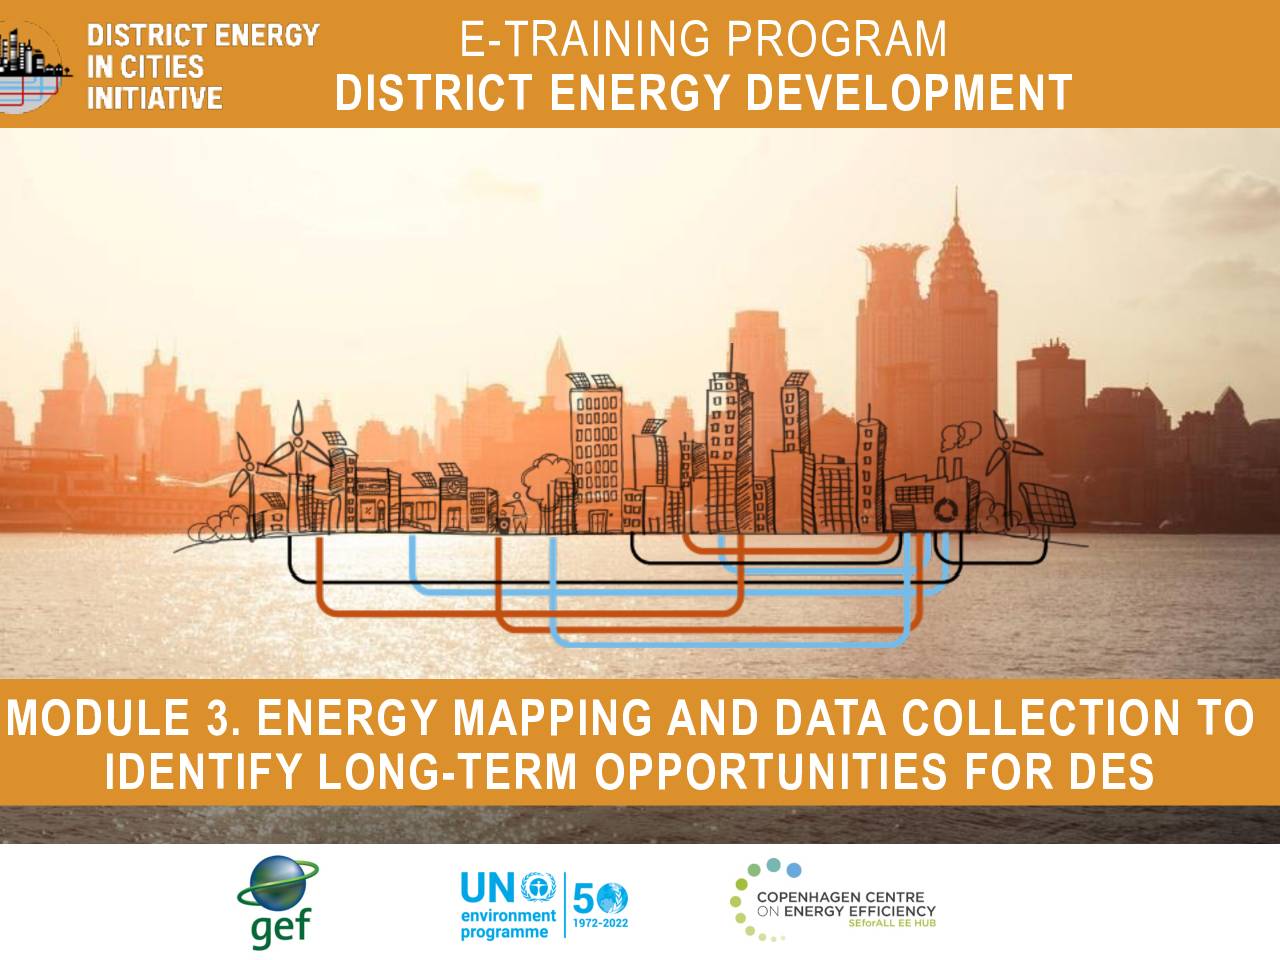 Module 3 – Energy mapping and data collection to identify long-term opportunities for district energy systems